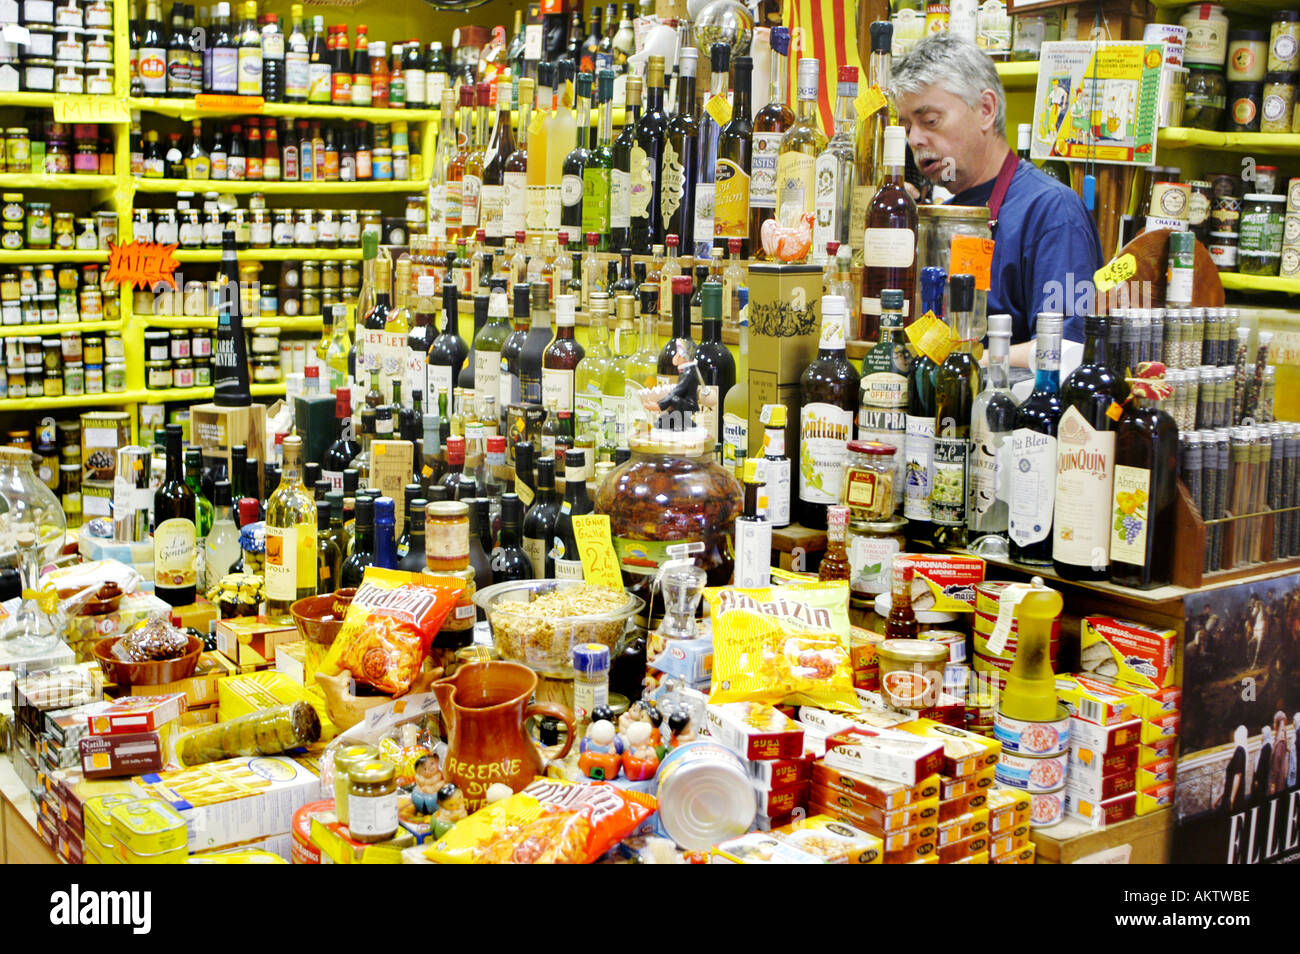 Perpignan, France, Small Local French Grocery Store, Delicatessen, Interiors with Products on Display, consumer choices Stock Photo